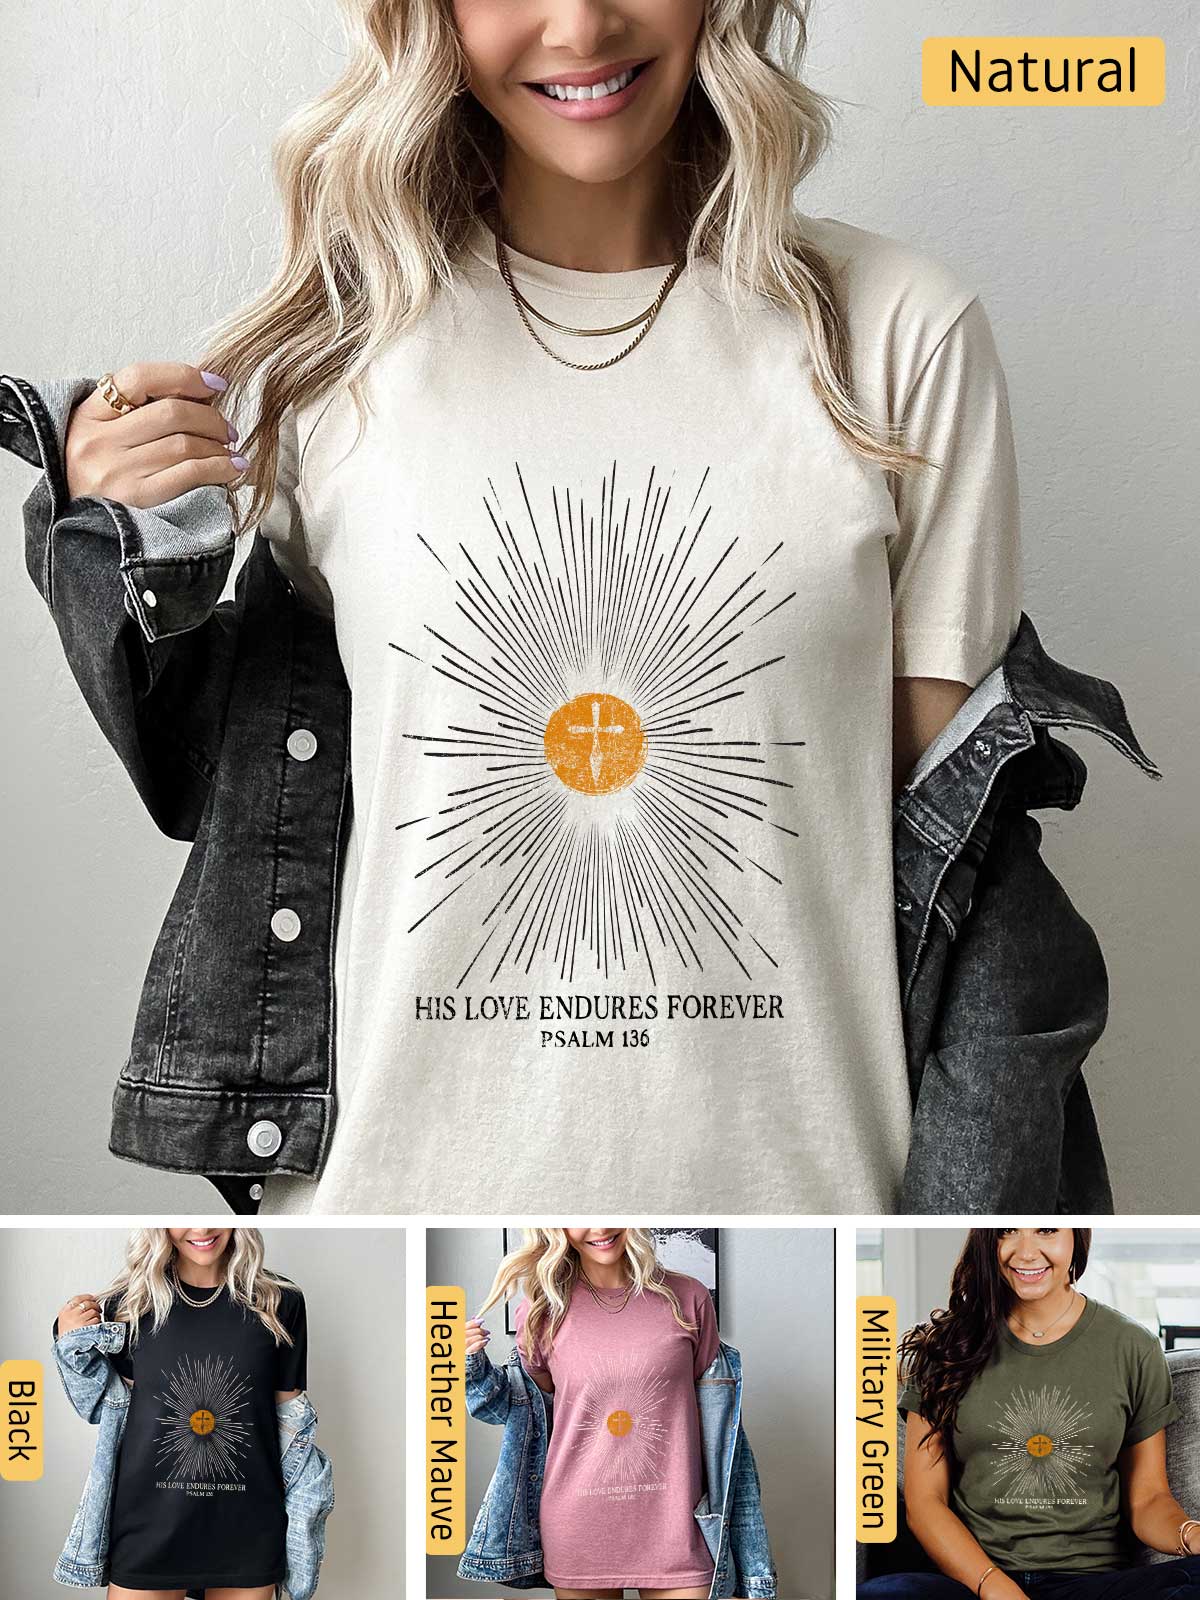 a woman wearing a t - shirt with a sun design on it